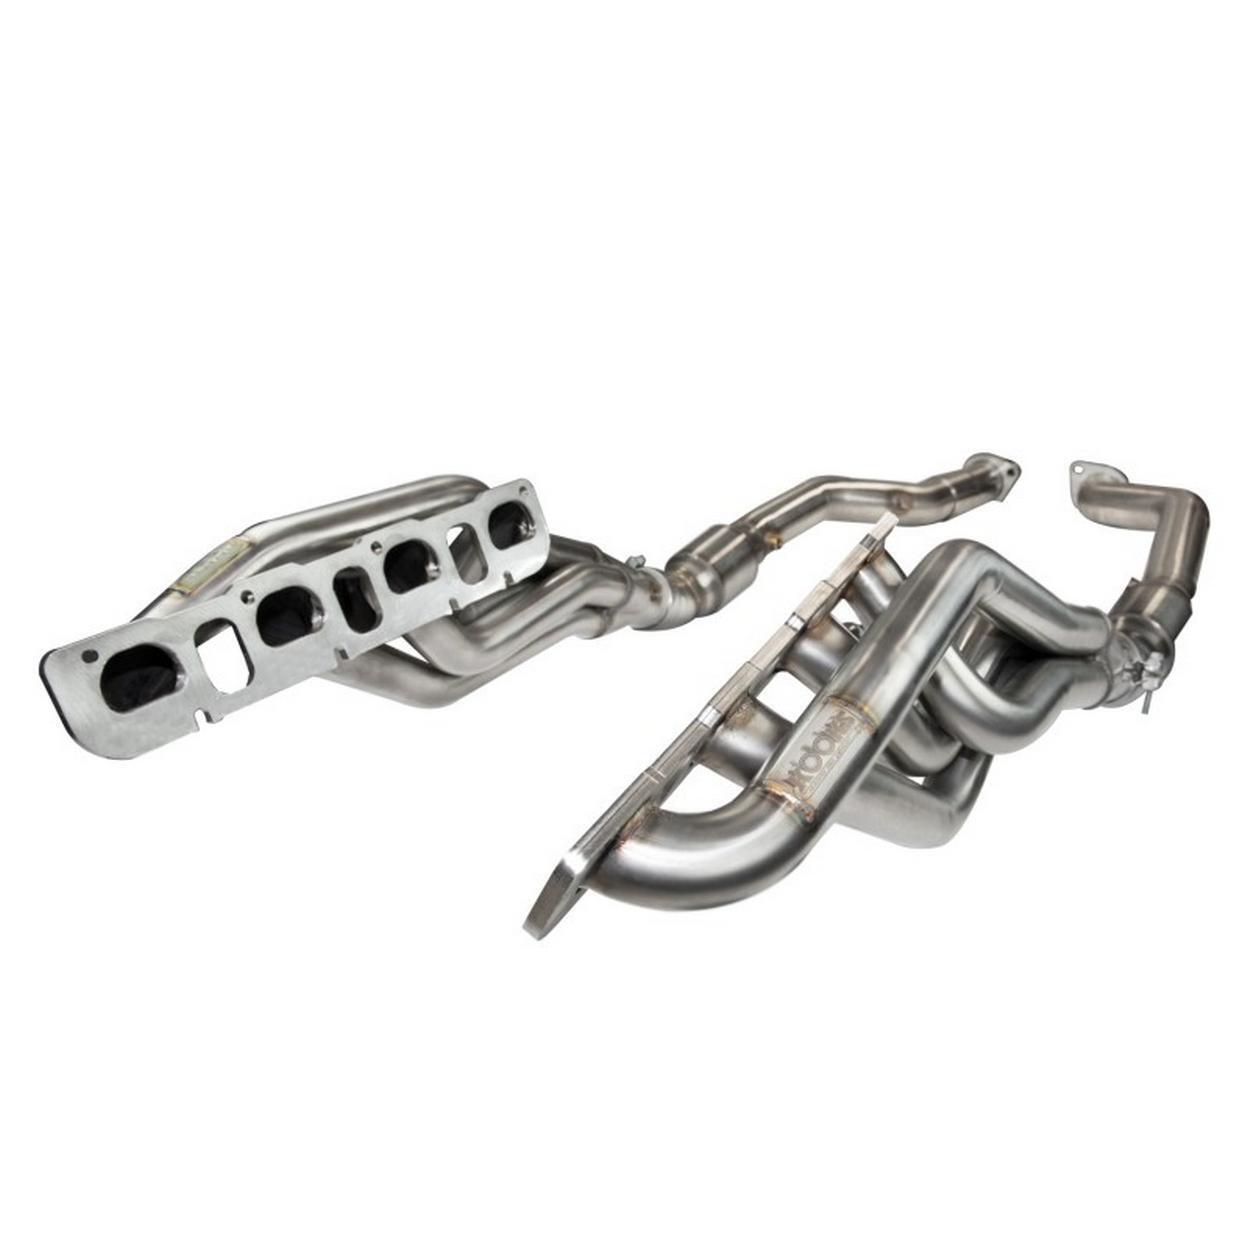 Exhaust Header for 2012-2013 Jeep Grand Cherokee SRT8 6.4L V8 GAS OHV